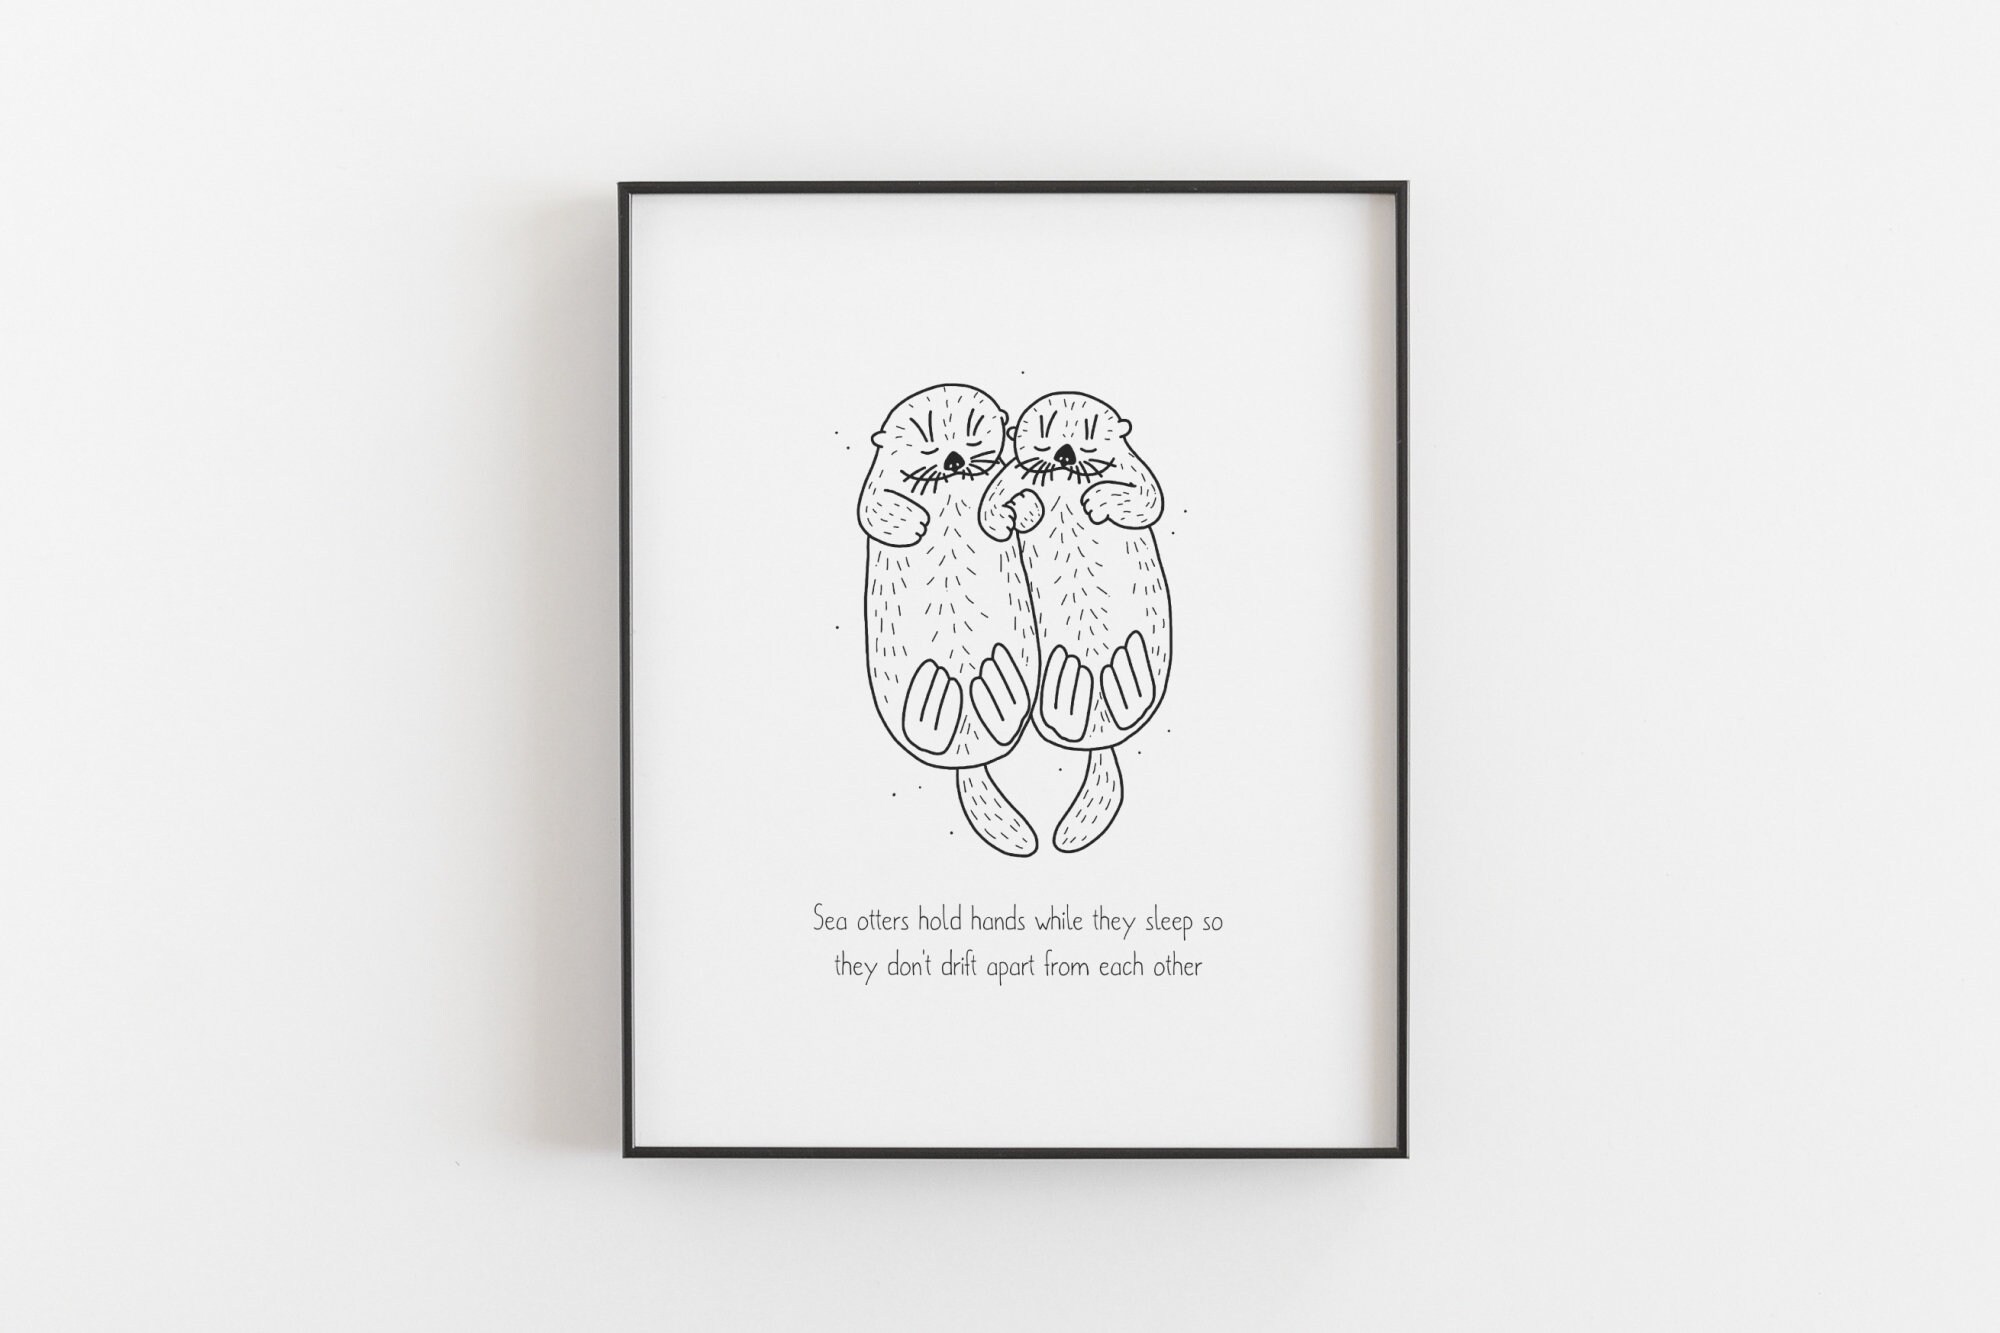 Discover Otter holding hands print - Funny animal poster, Sea otters, Love, Family, Friendship, Inspirational quote, No Frame